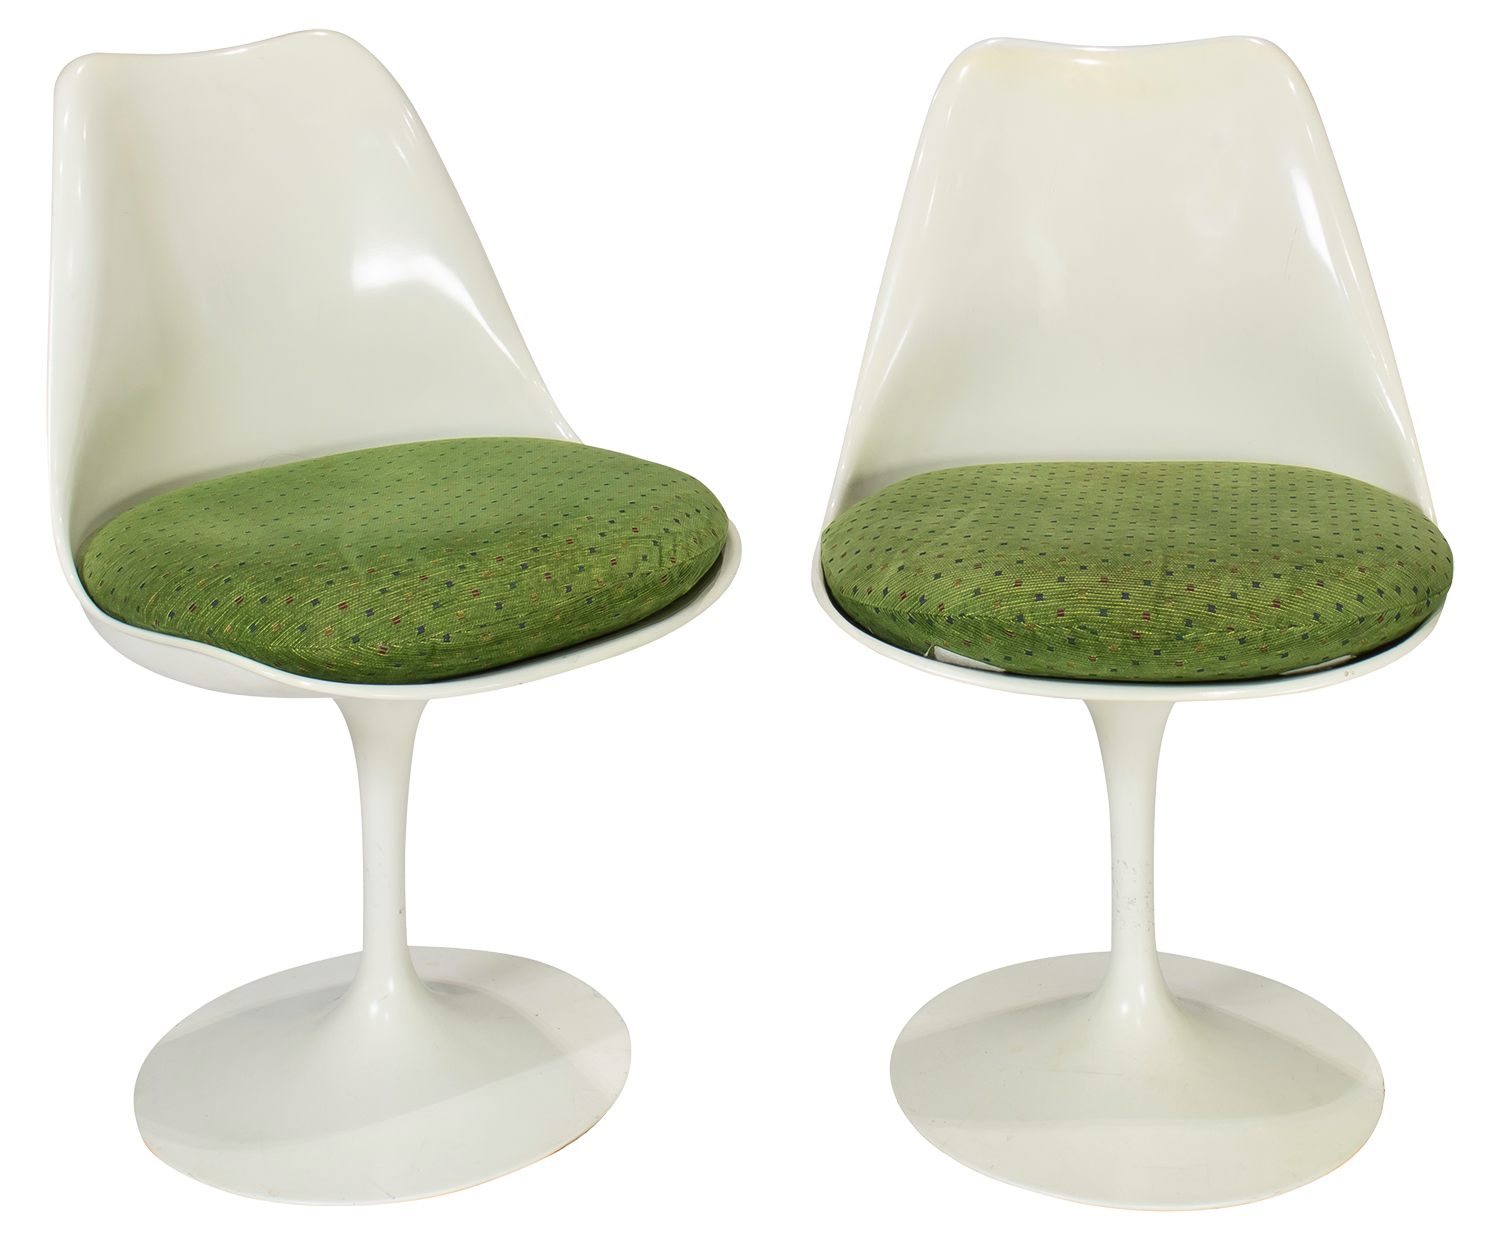 Eero Saarinen for Knoll Tulip chairs (part of a larger dining suite).